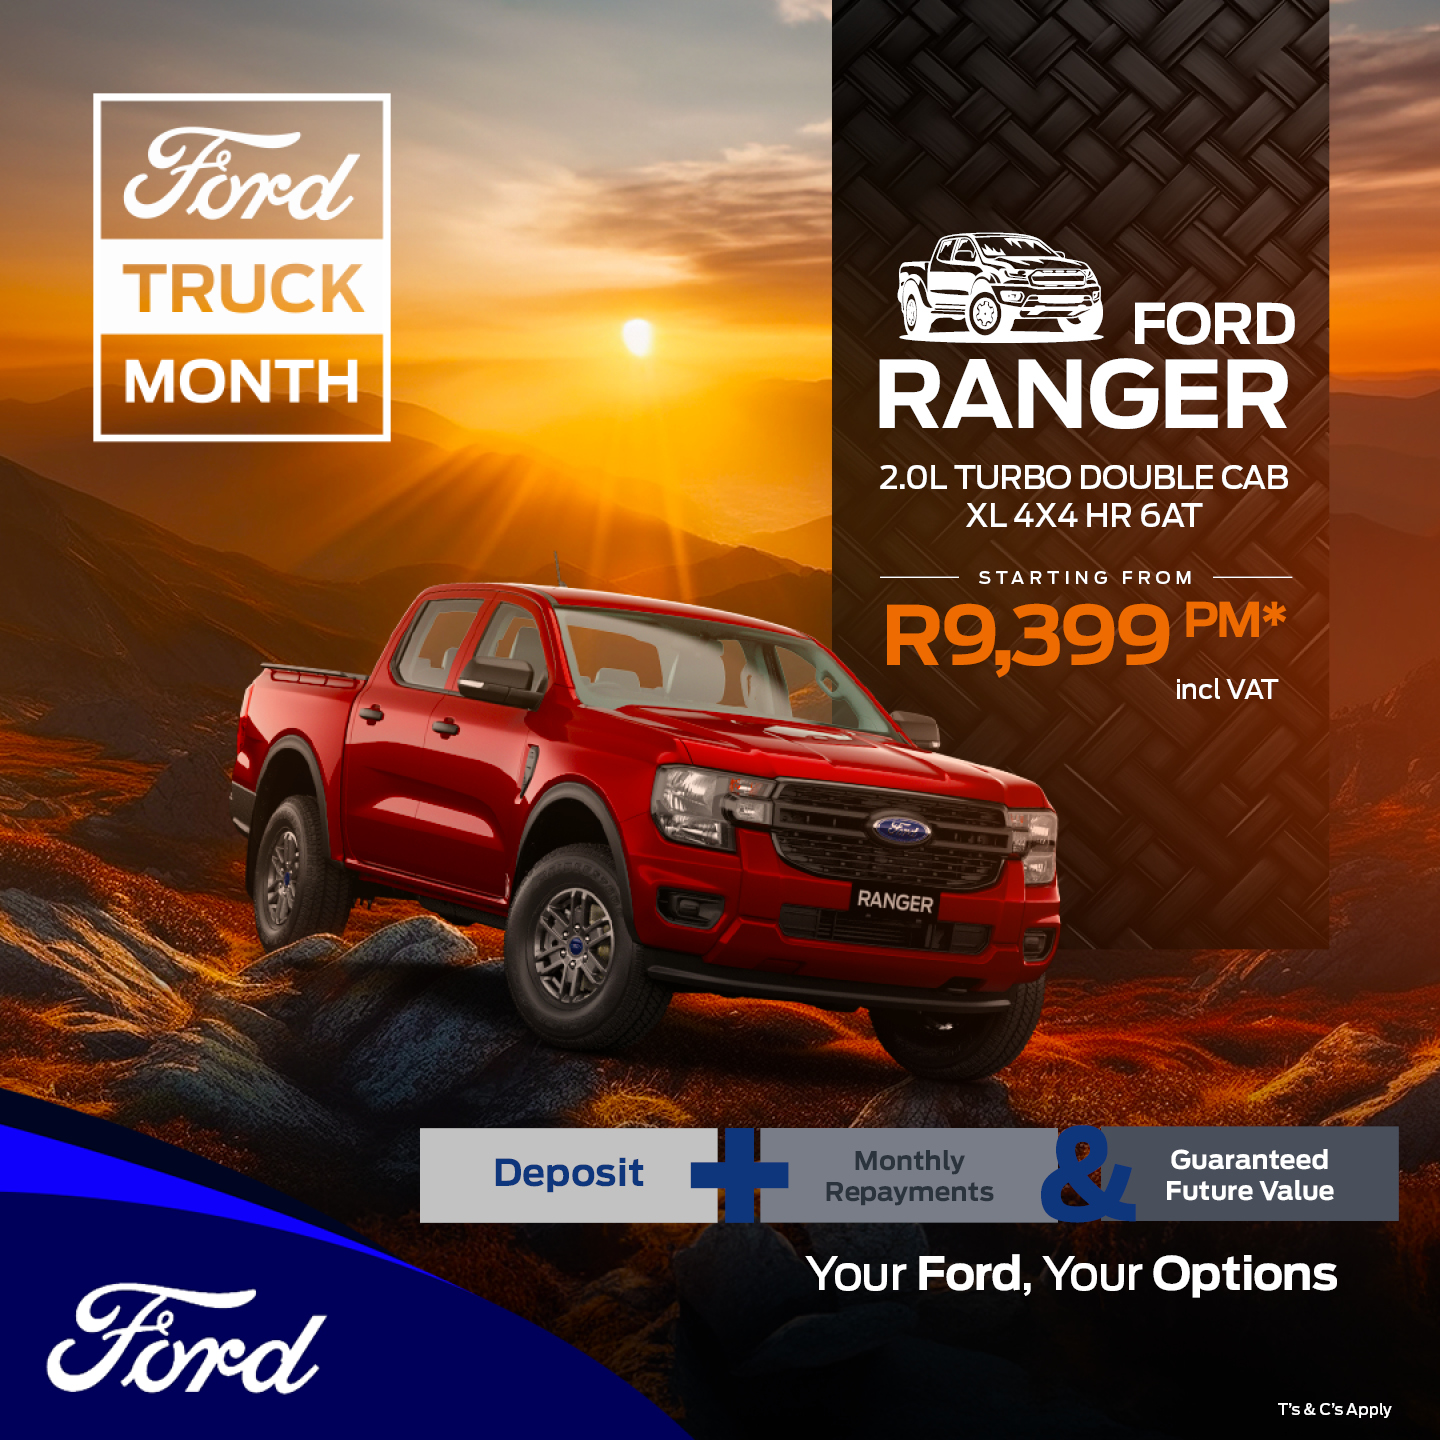 Ford Ranger 2.0L Turbo D/Cab XL 4×4 HR 6AT image from 